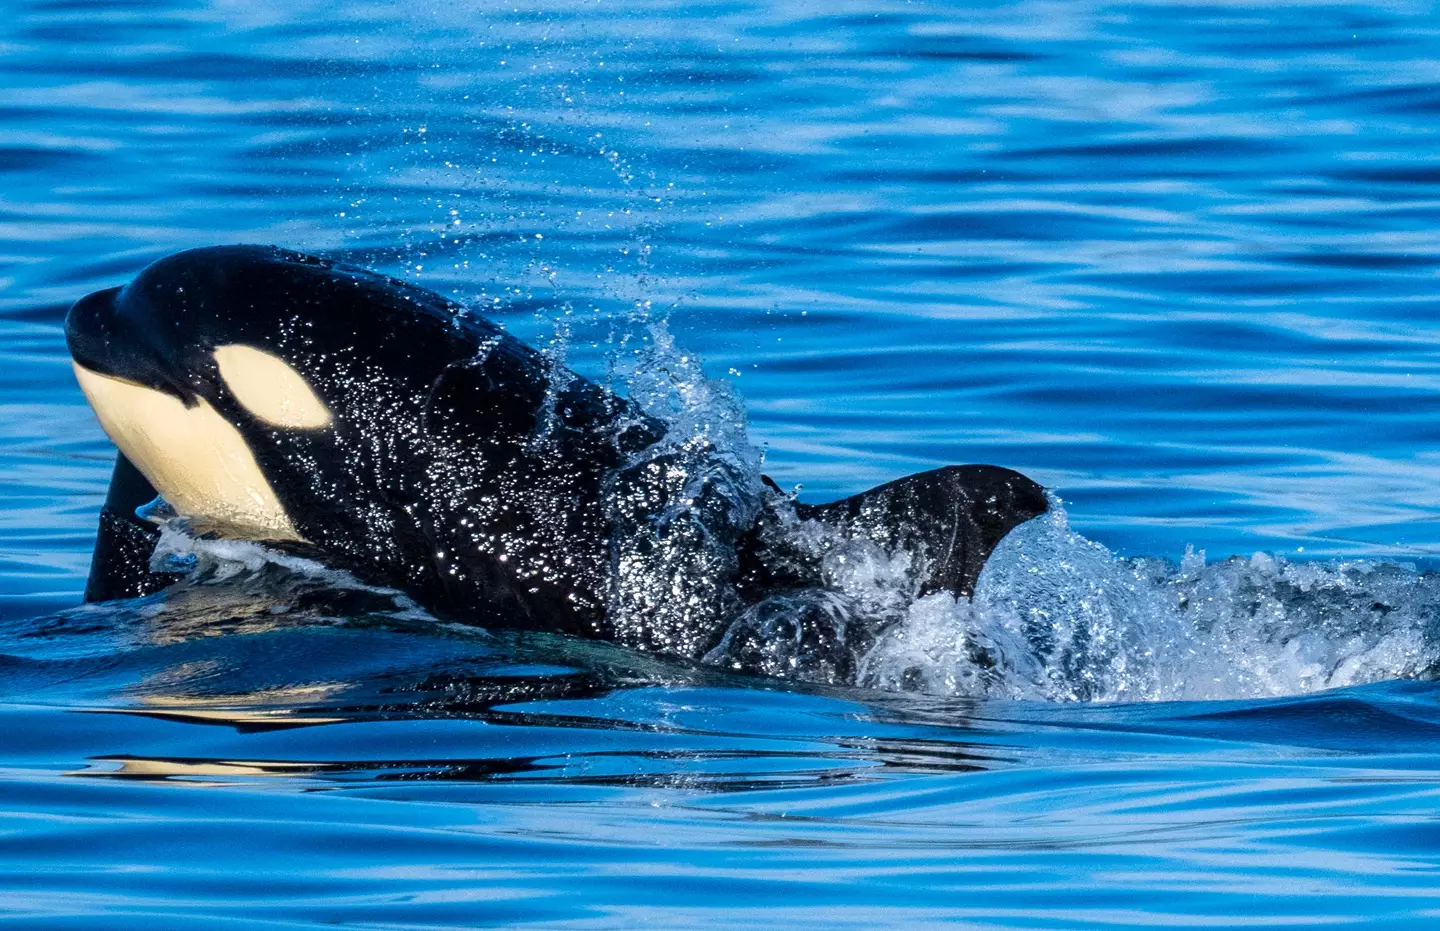 Orcas in captivity has lead to many tragic incidents involving both the whales and humans. (Mark Rightmire/MediaNews Group/Orange County Register via Getty Images)